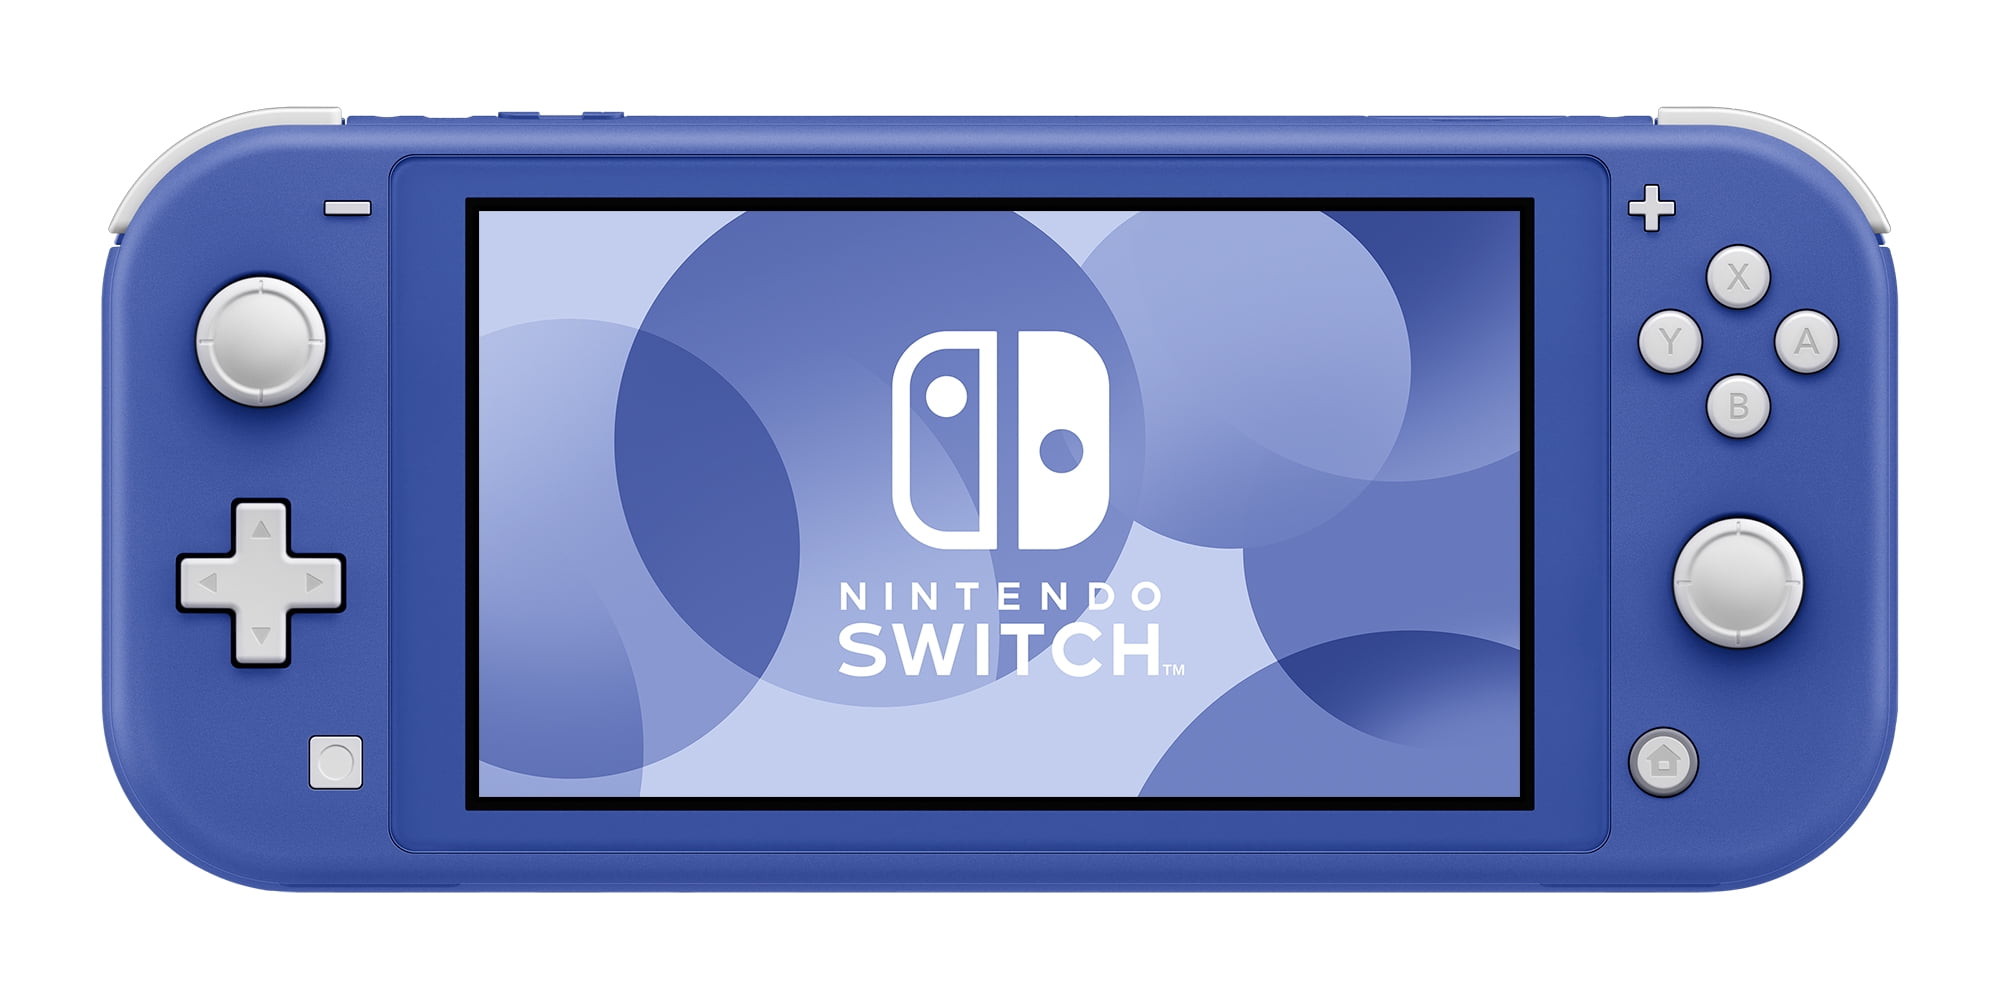 Nintendo Switch Lite Newest Blue Game Console with Extra External 64GB  Storage, LCD Touchscreen, Built-in Plus Control Pad, WiFi, Bluetooth,  Ultimate 